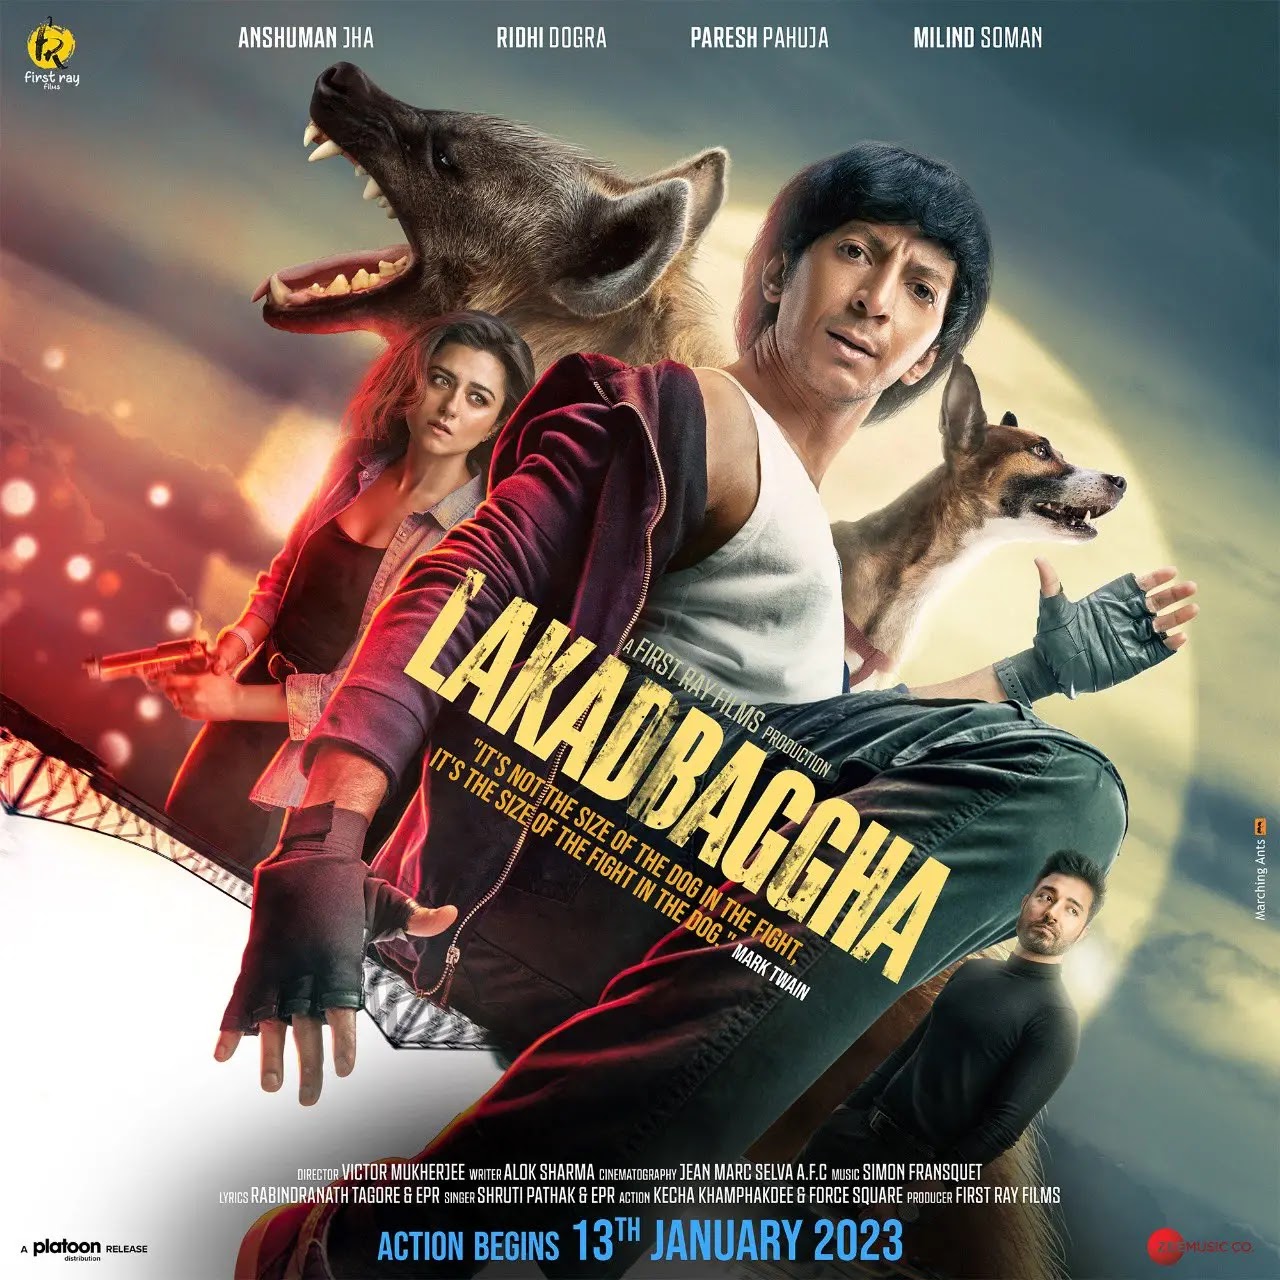 Lakadbaggha first look poster is out now.